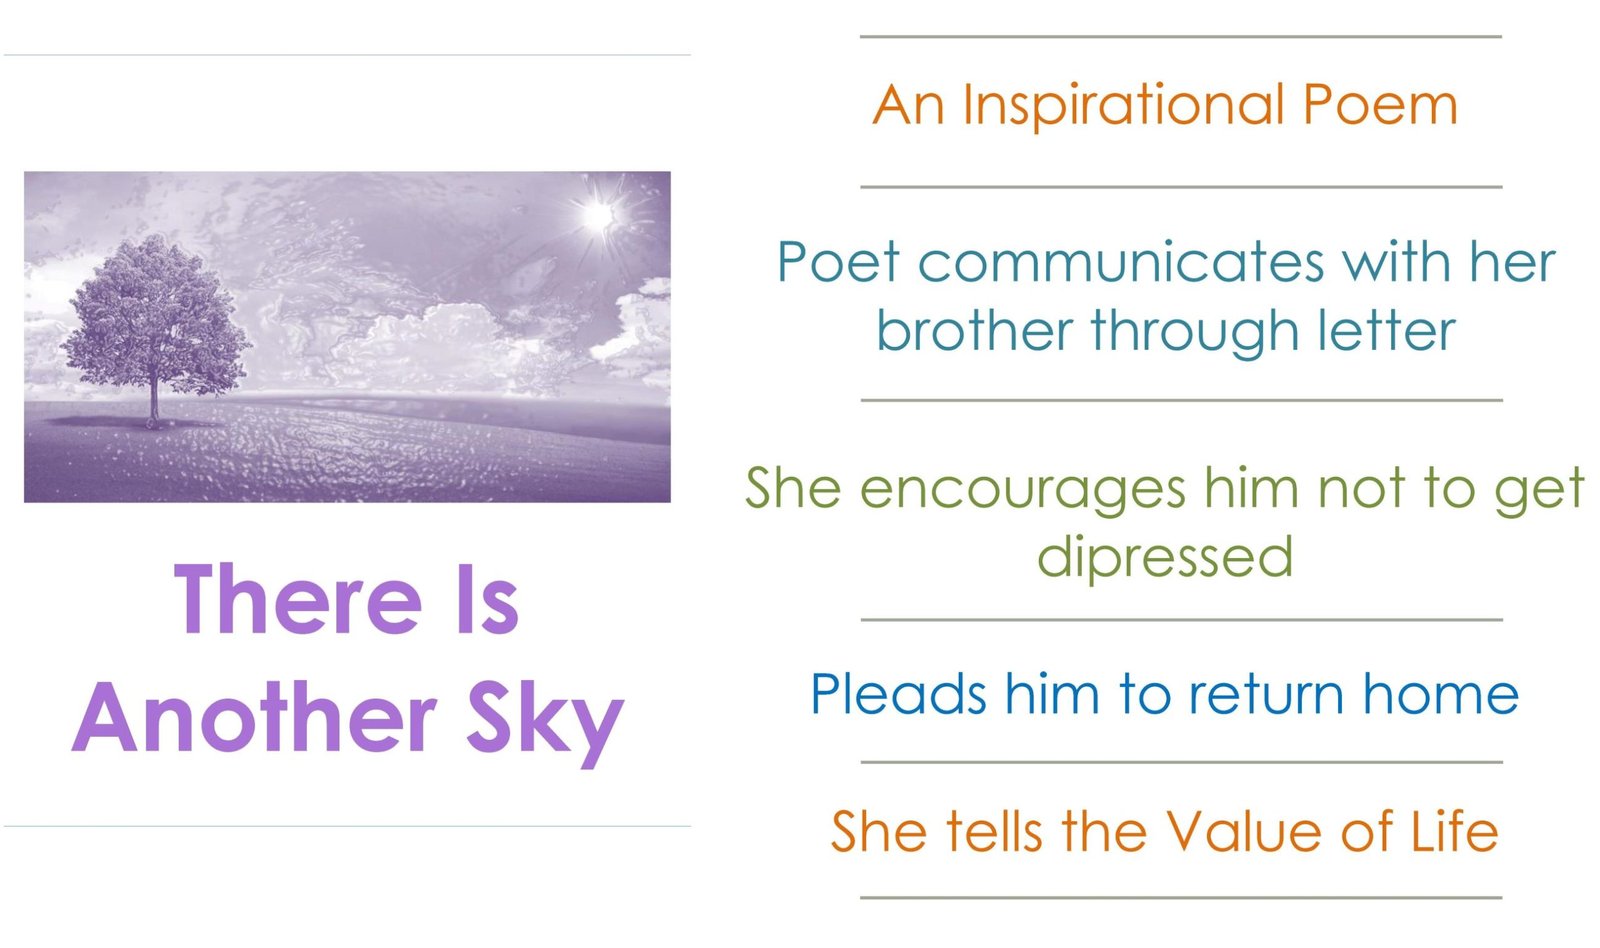 POEM_THERE_IS_ANOTHER_SKY_3_